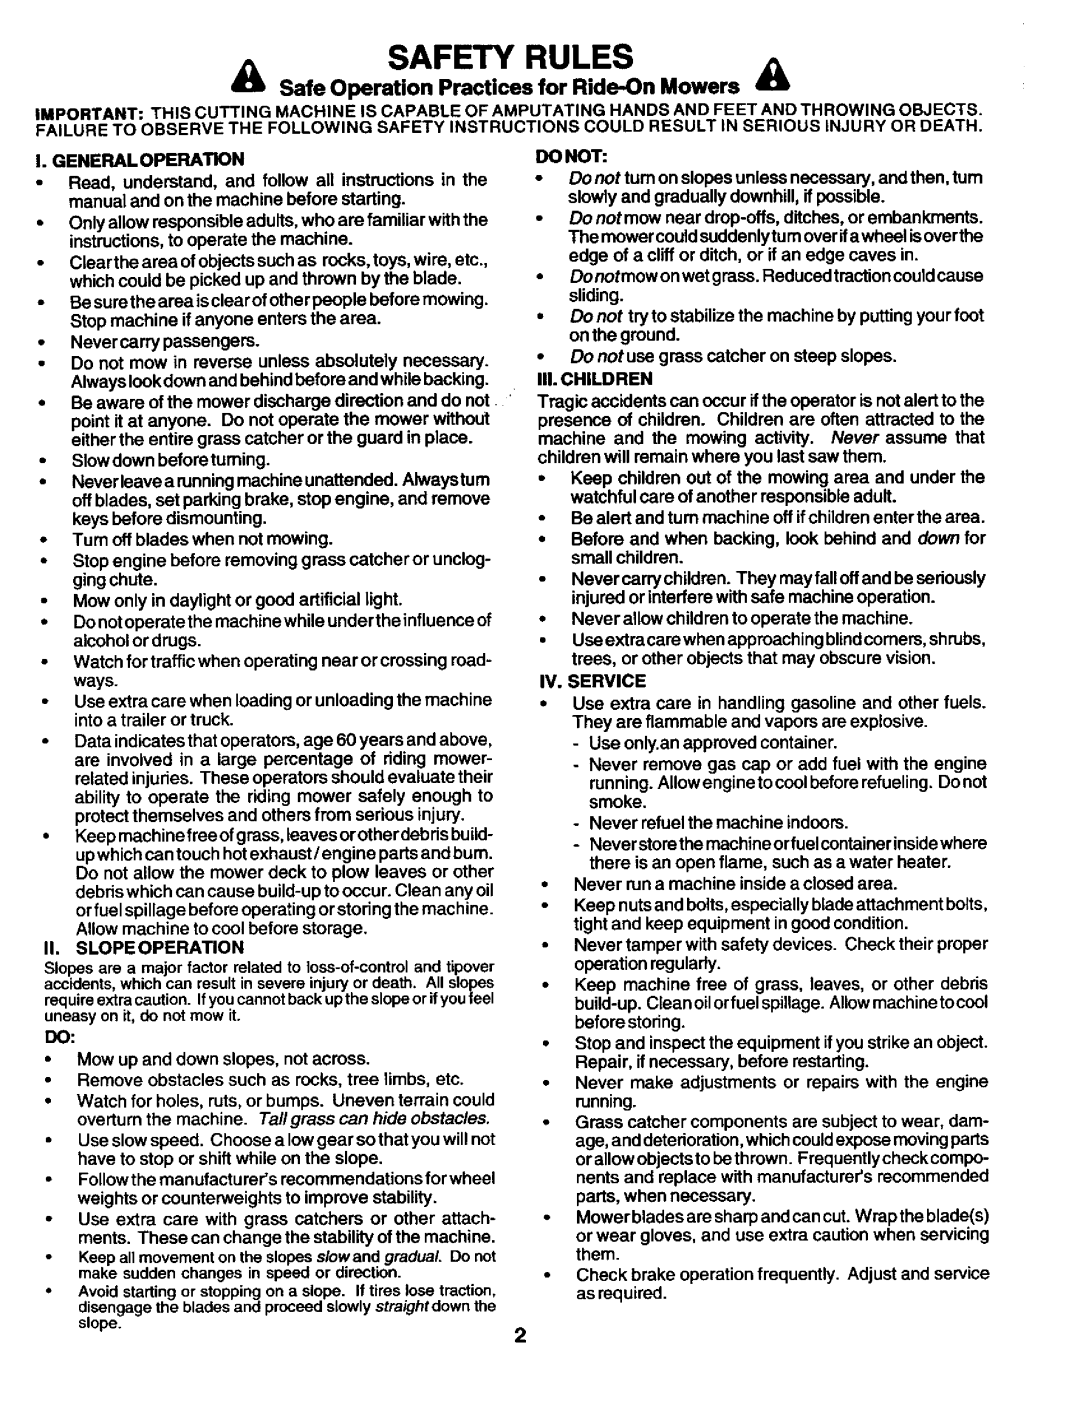 Craftsman 944.602951 owner manual SAFETY RULES =t, 4Rk Safe Operation Practices for Ride-OnMowers a 